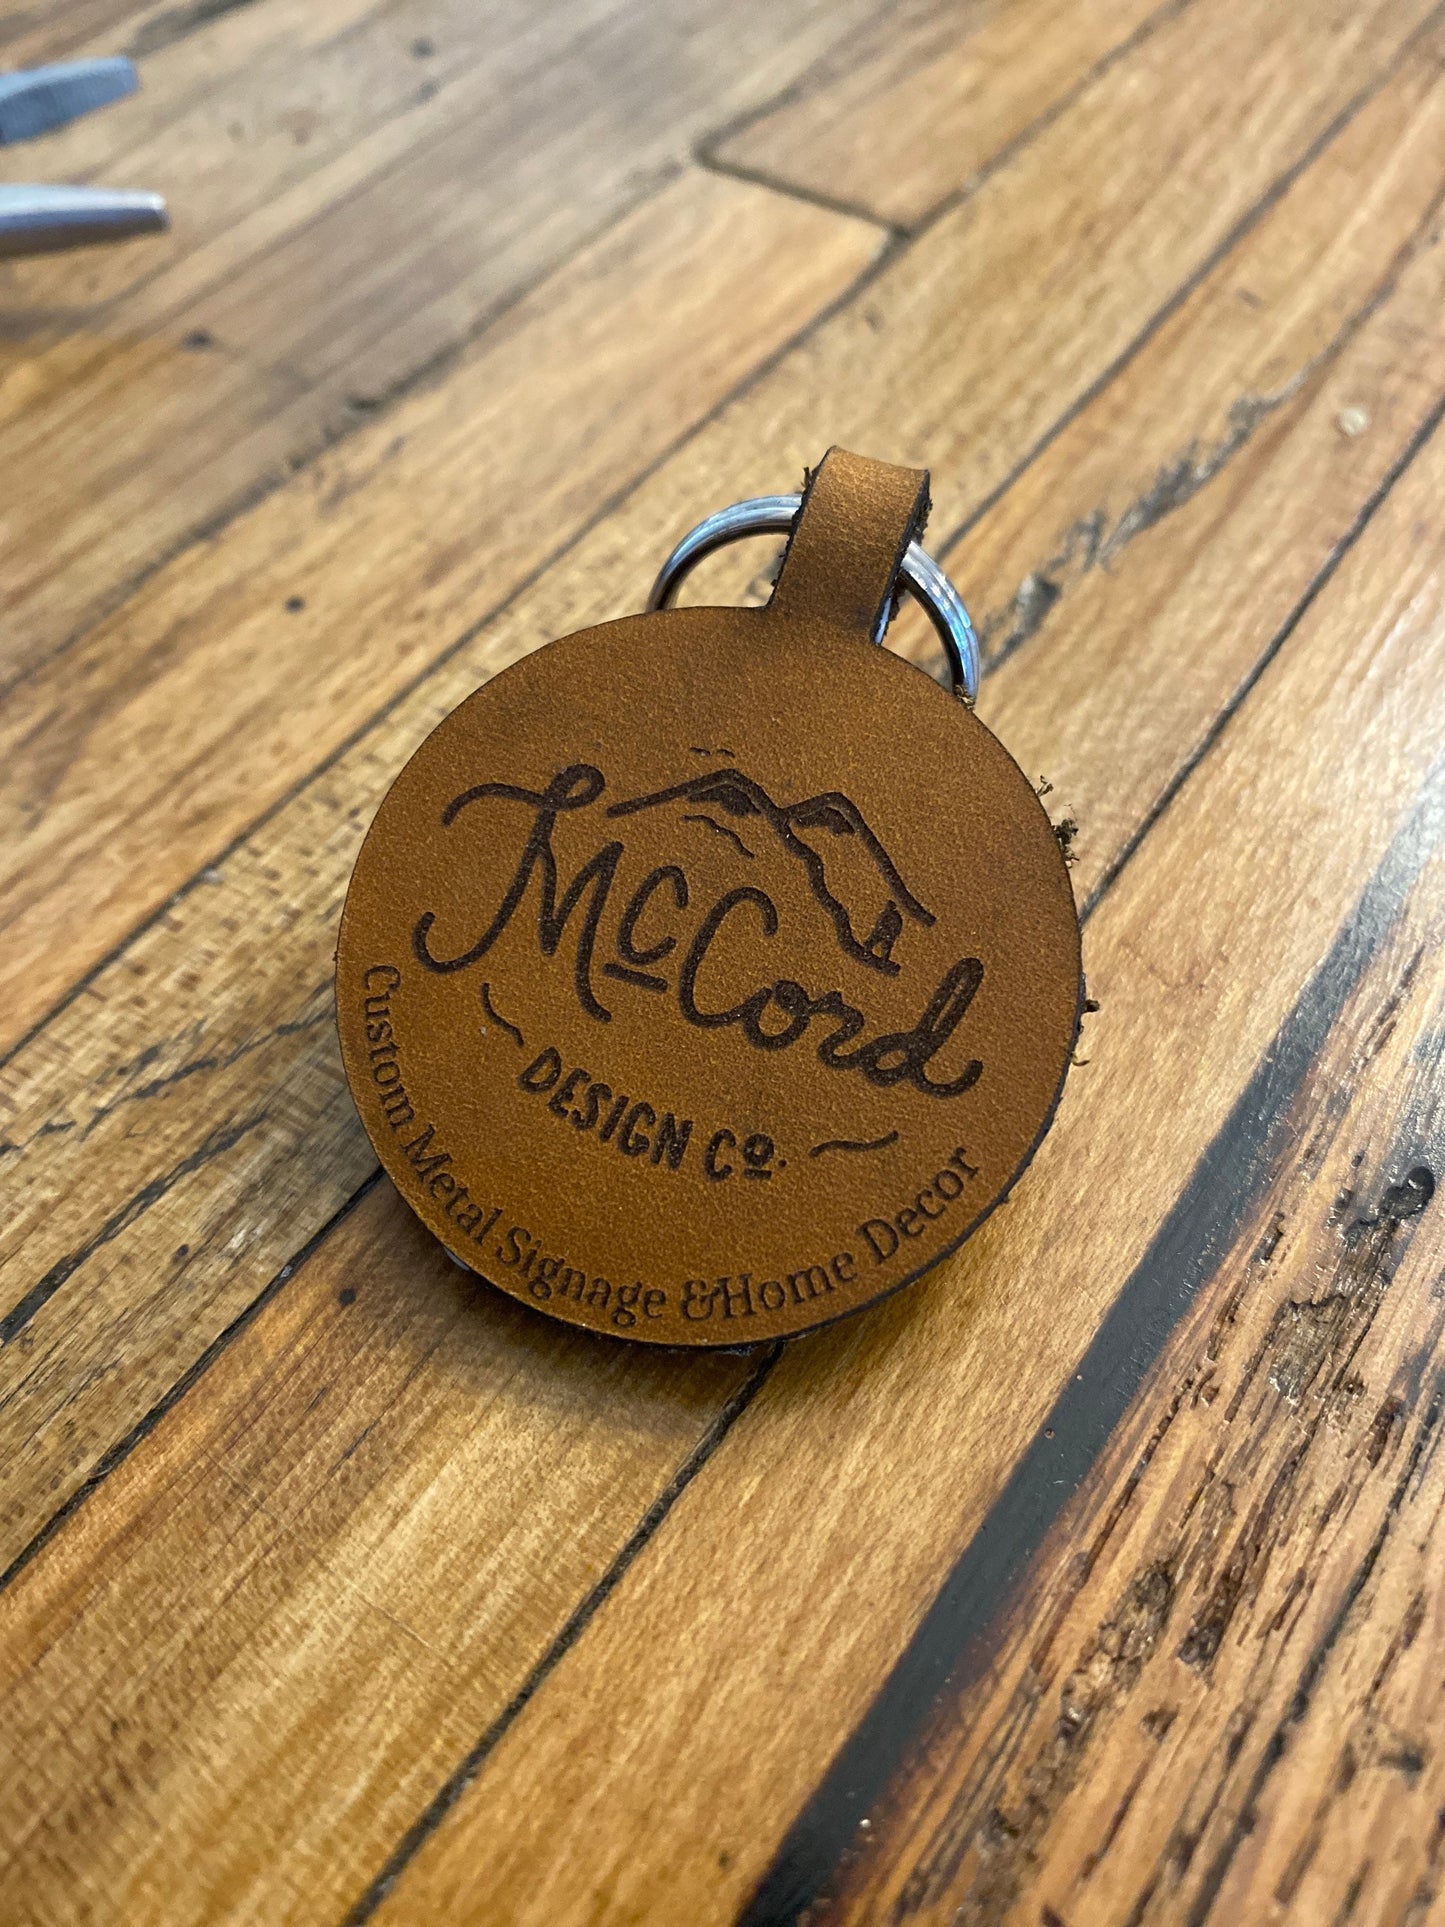 Personalized leather keychain